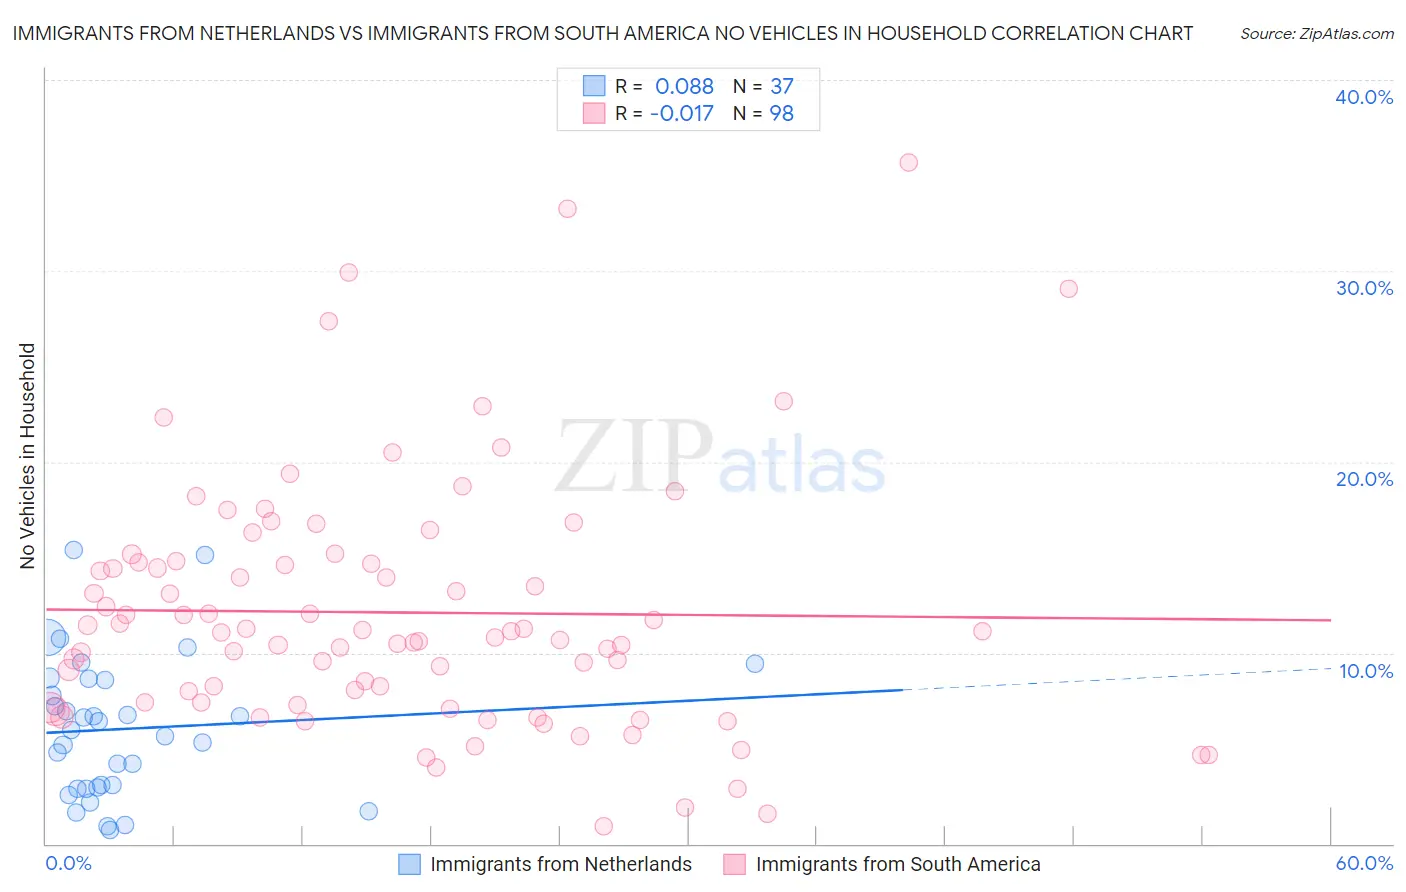 Immigrants from Netherlands vs Immigrants from South America No Vehicles in Household